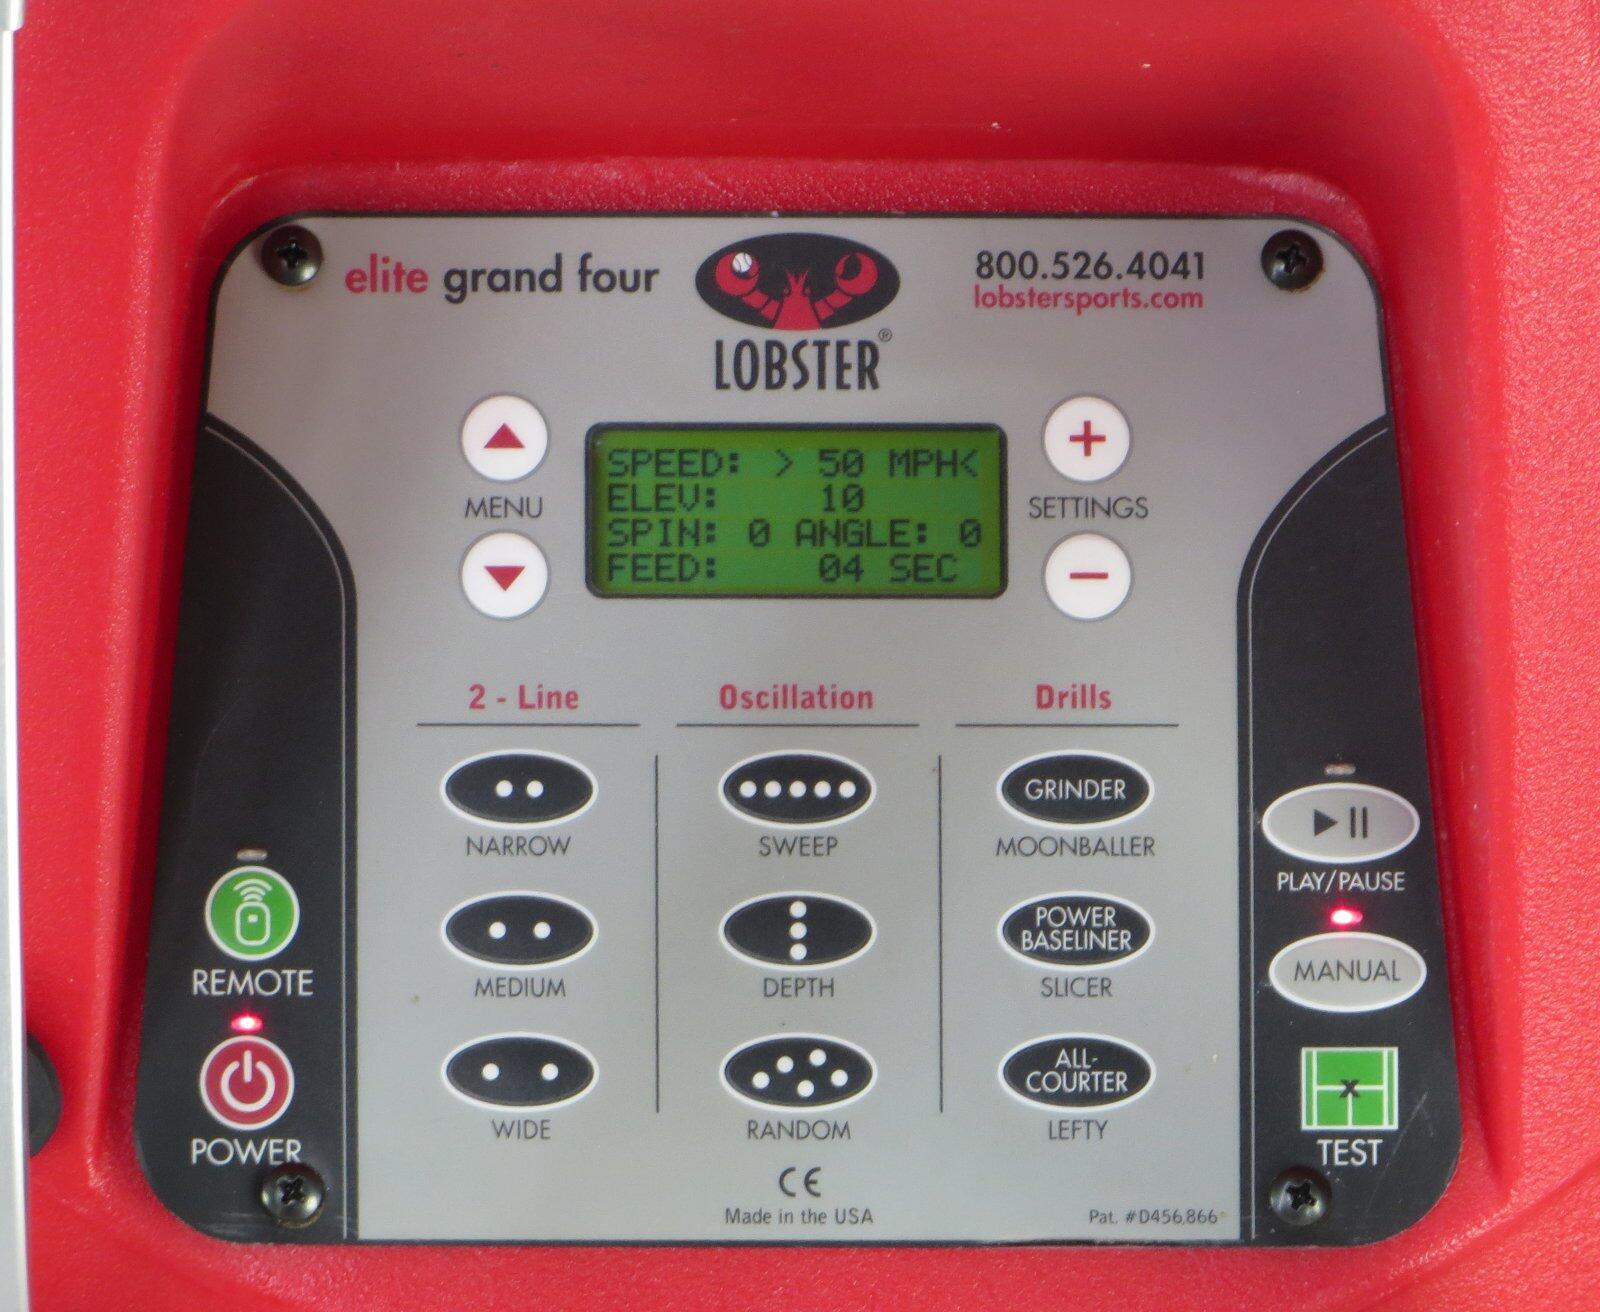 Lobster Elite Grand 4 used, reconditioned control panel